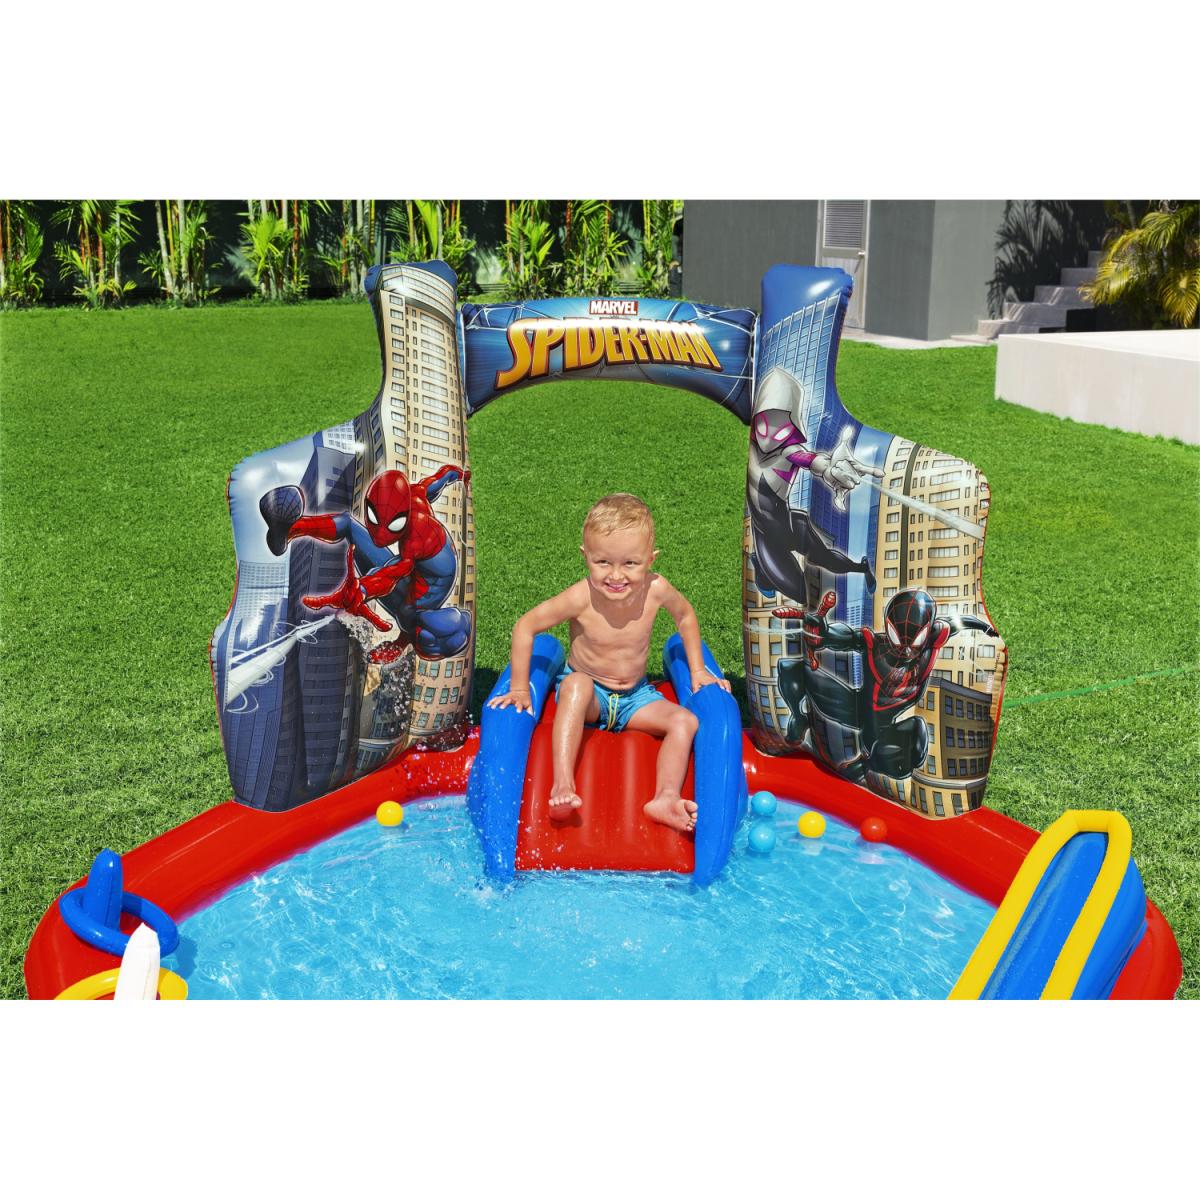 PLAYSET INFLABLE SPIDERMAN 2.11X2.06X1.2